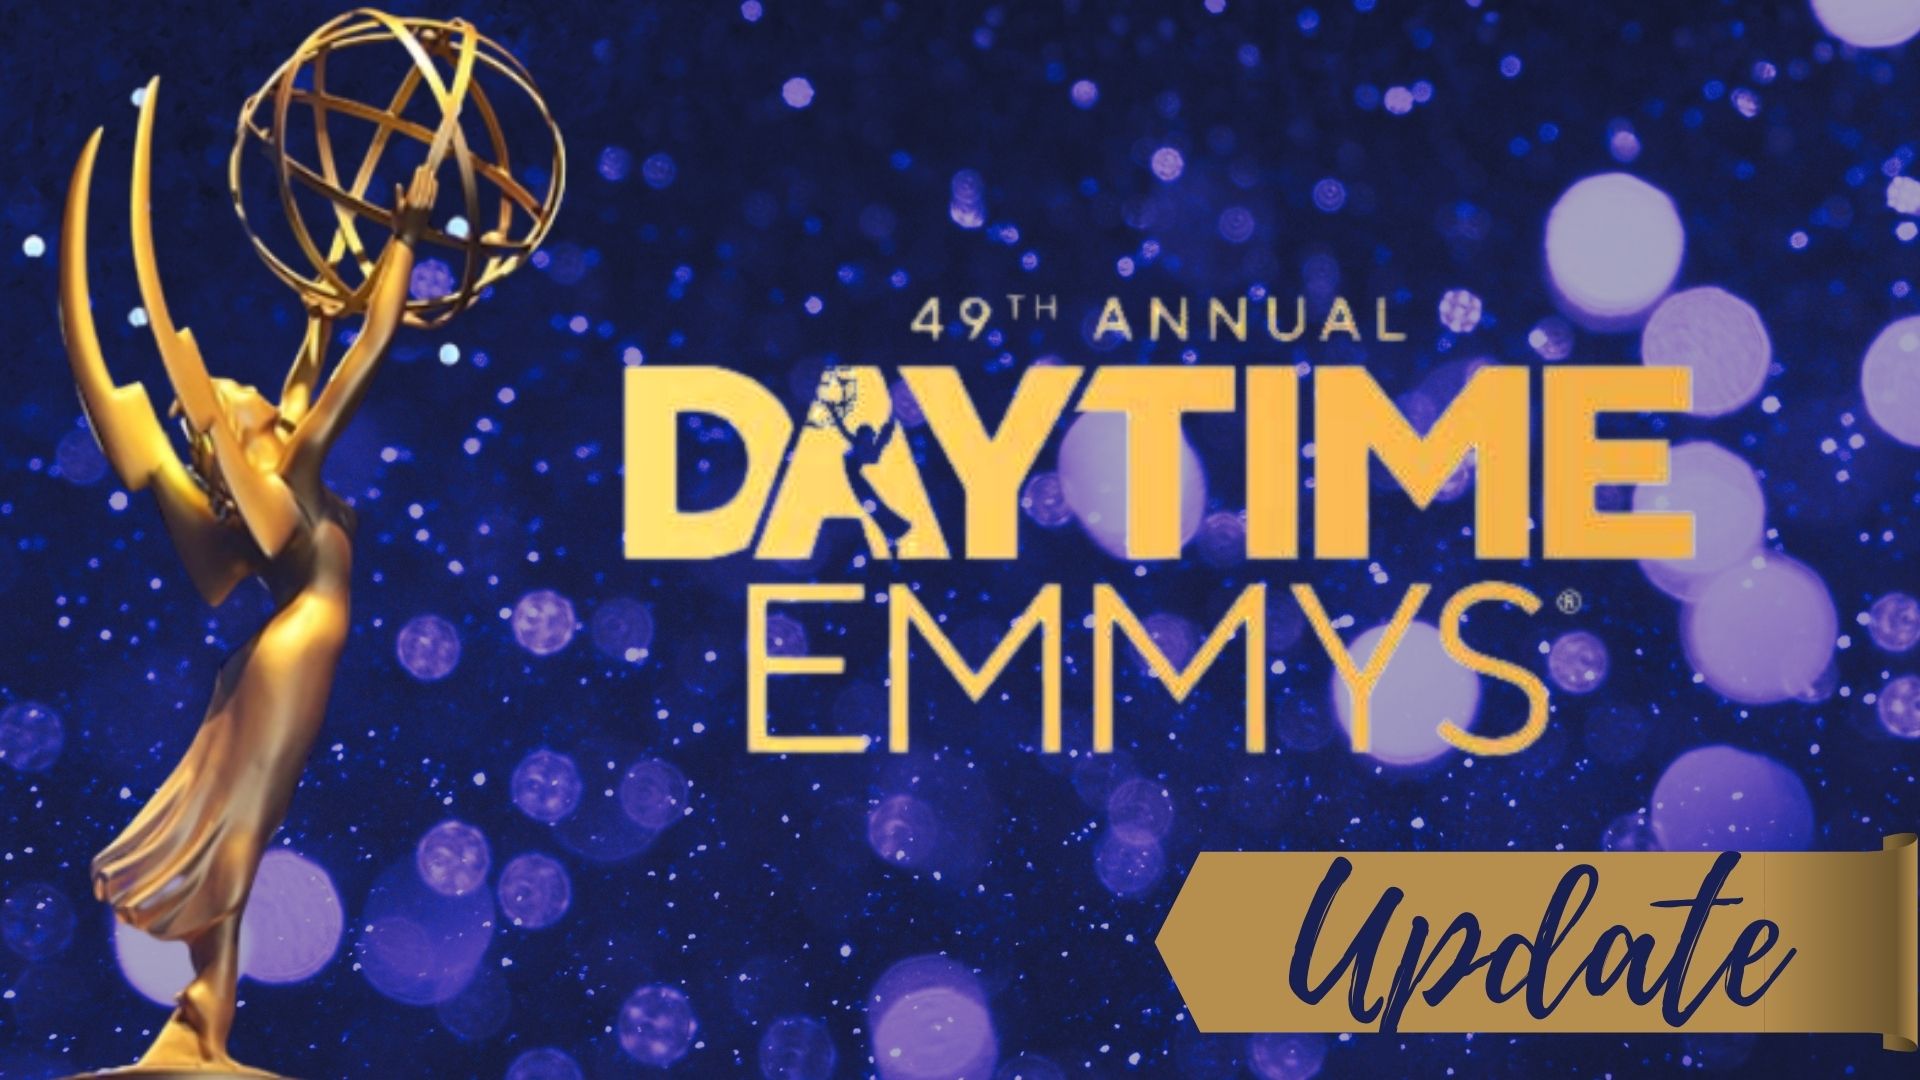 Find Out When Your Favorite Will Win at The 49th Annual Daytime Emmys